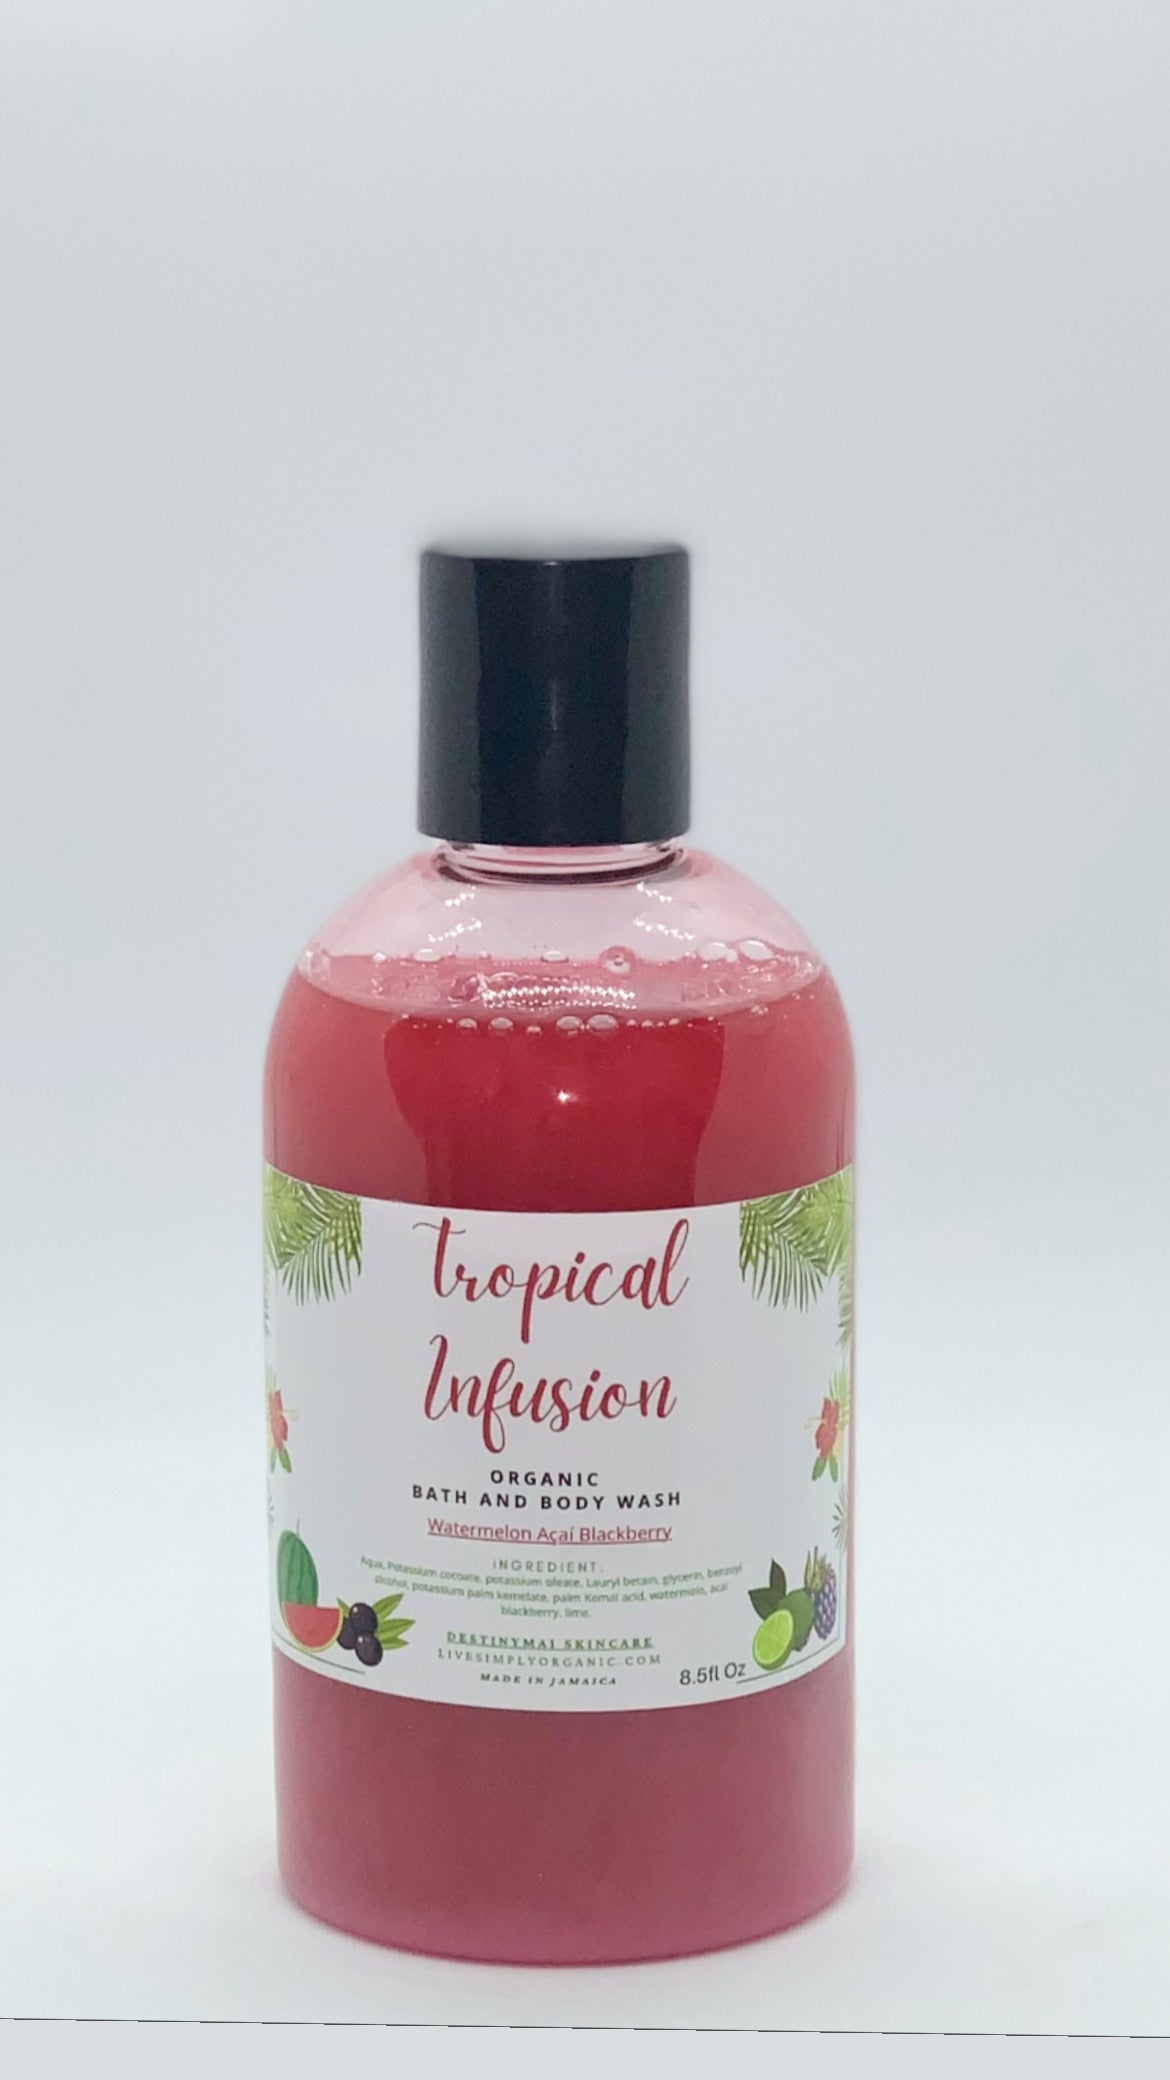 Tropical infusion body wash